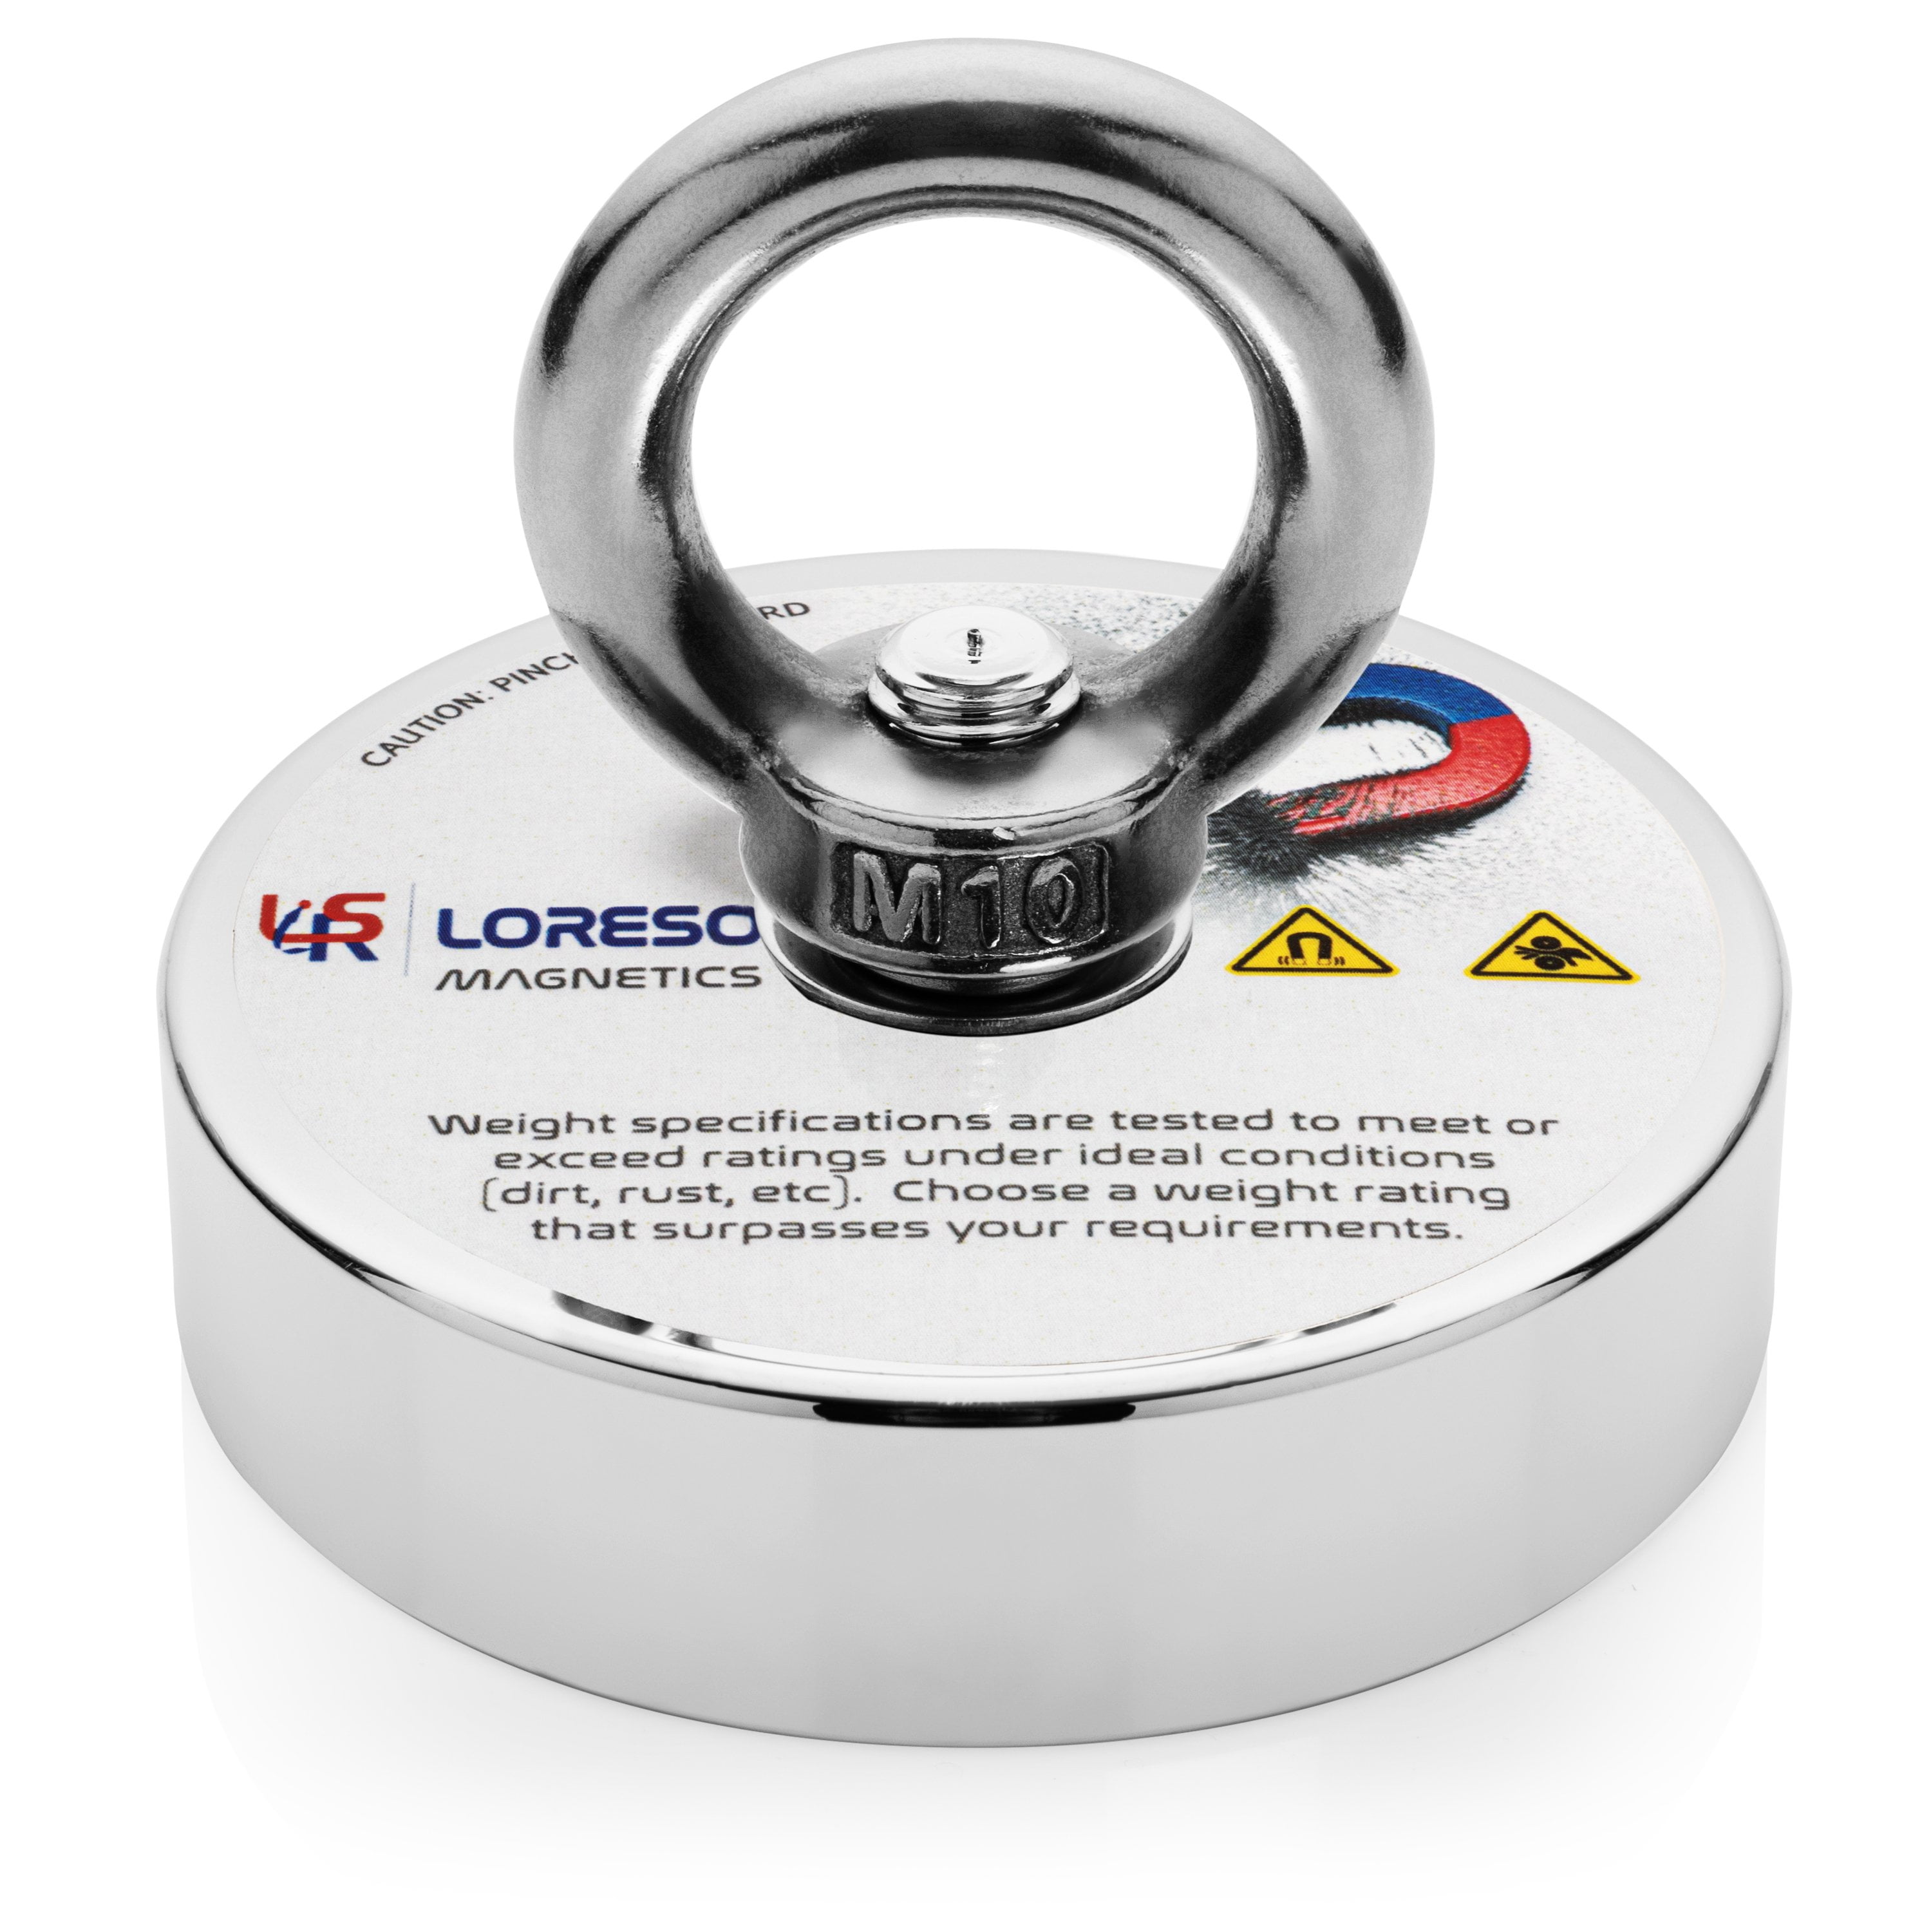 Loreso Fishing Magnet 550lb - Strong Neodymium with Eyebolt, Powerful Rare Earth for Magnet Fishing with a Magnetic Pulling of 550 Pounds ( 250 KG ) - Walmart.com